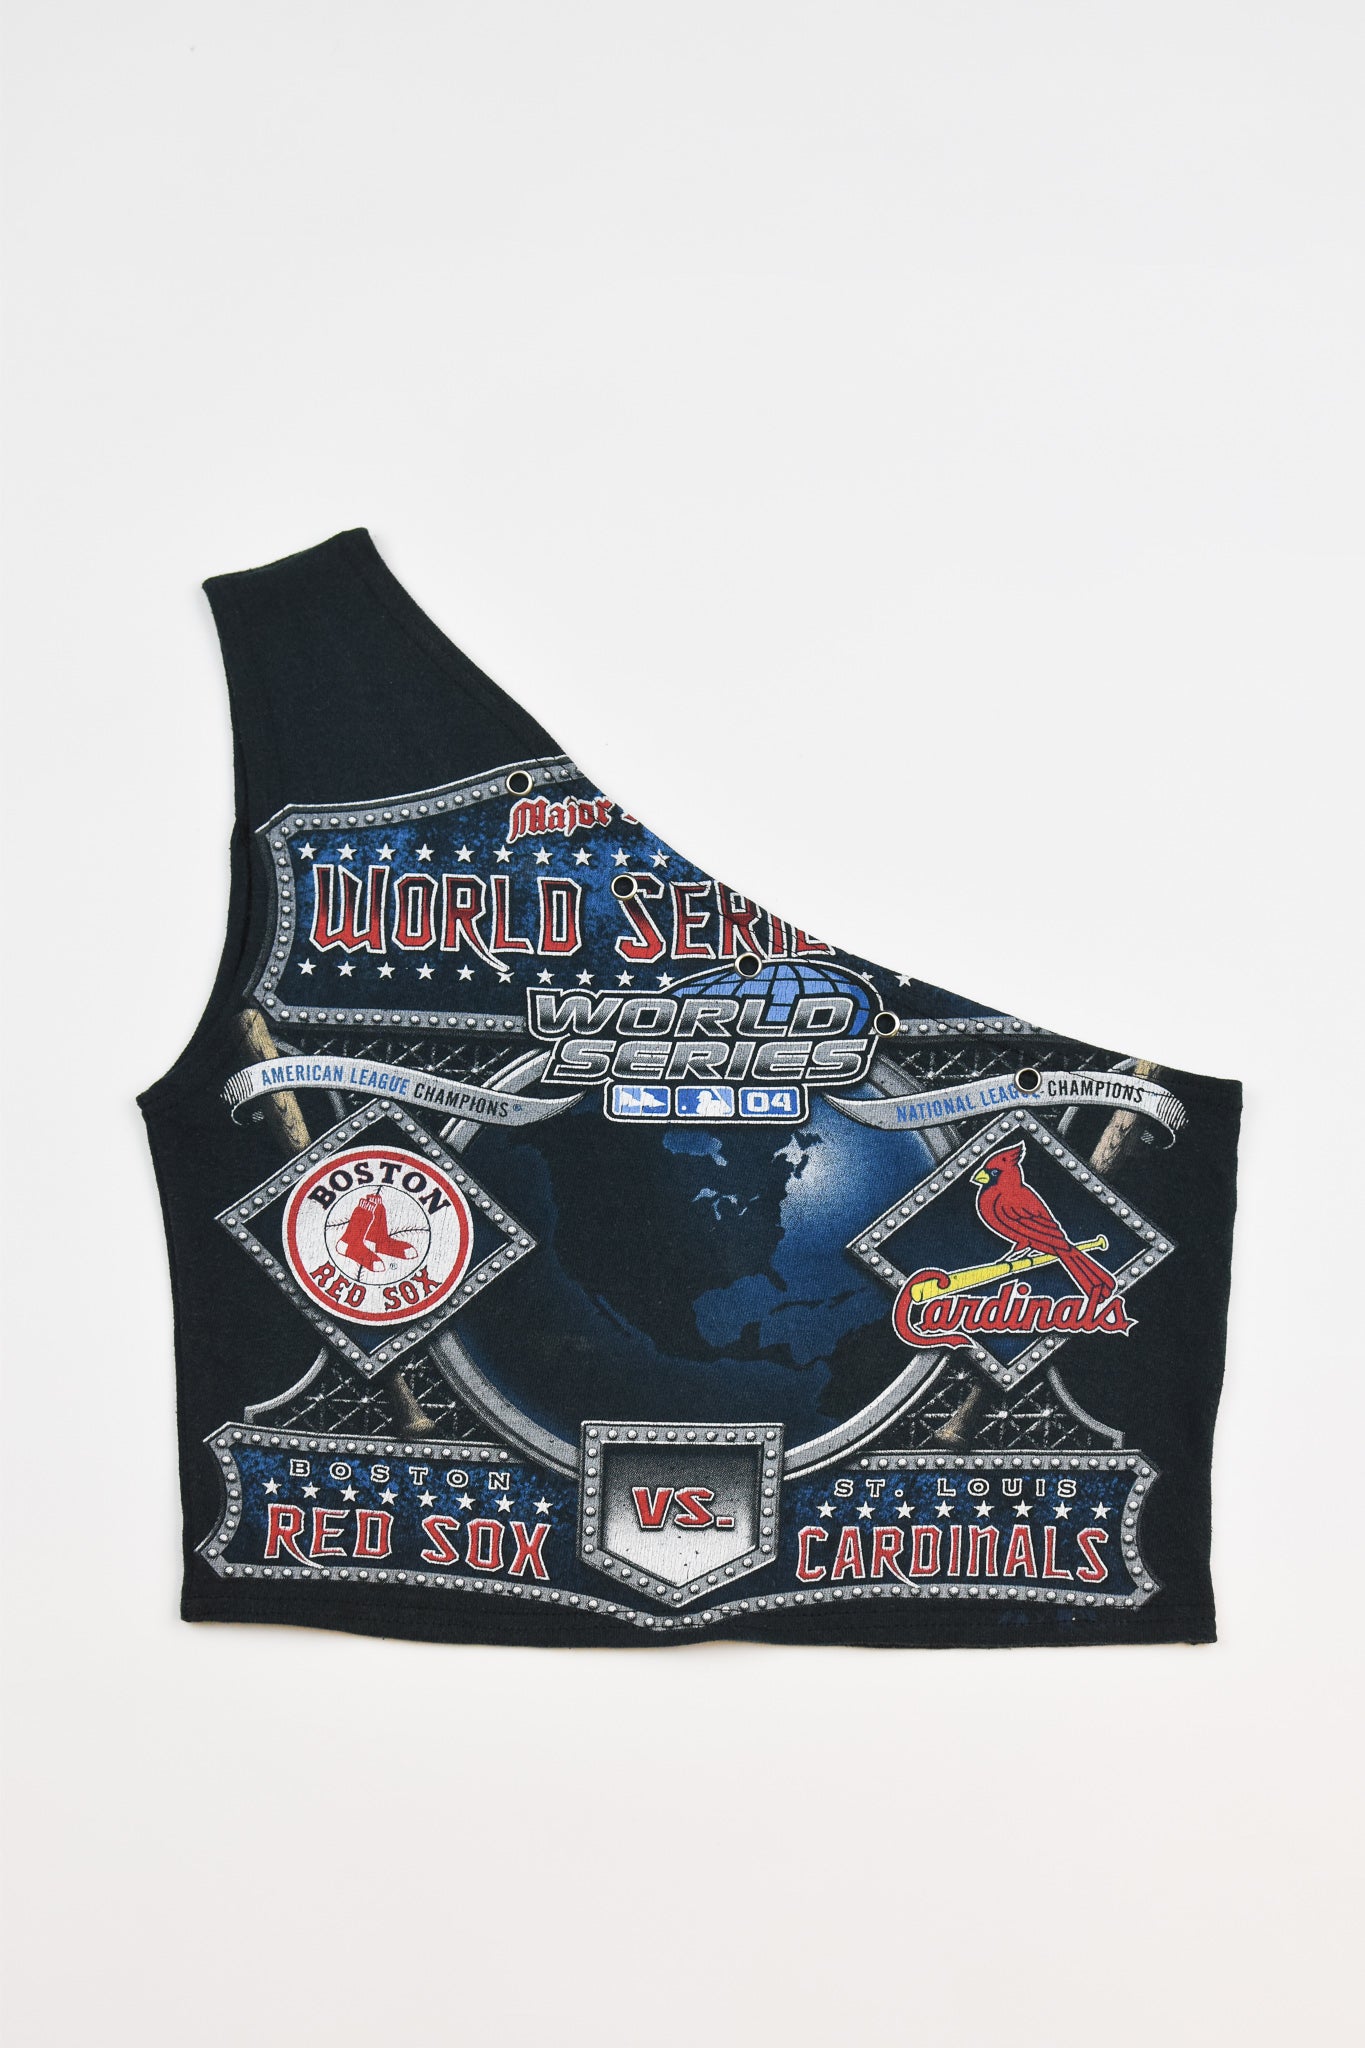 Upcycled Red Sox / Cardinals